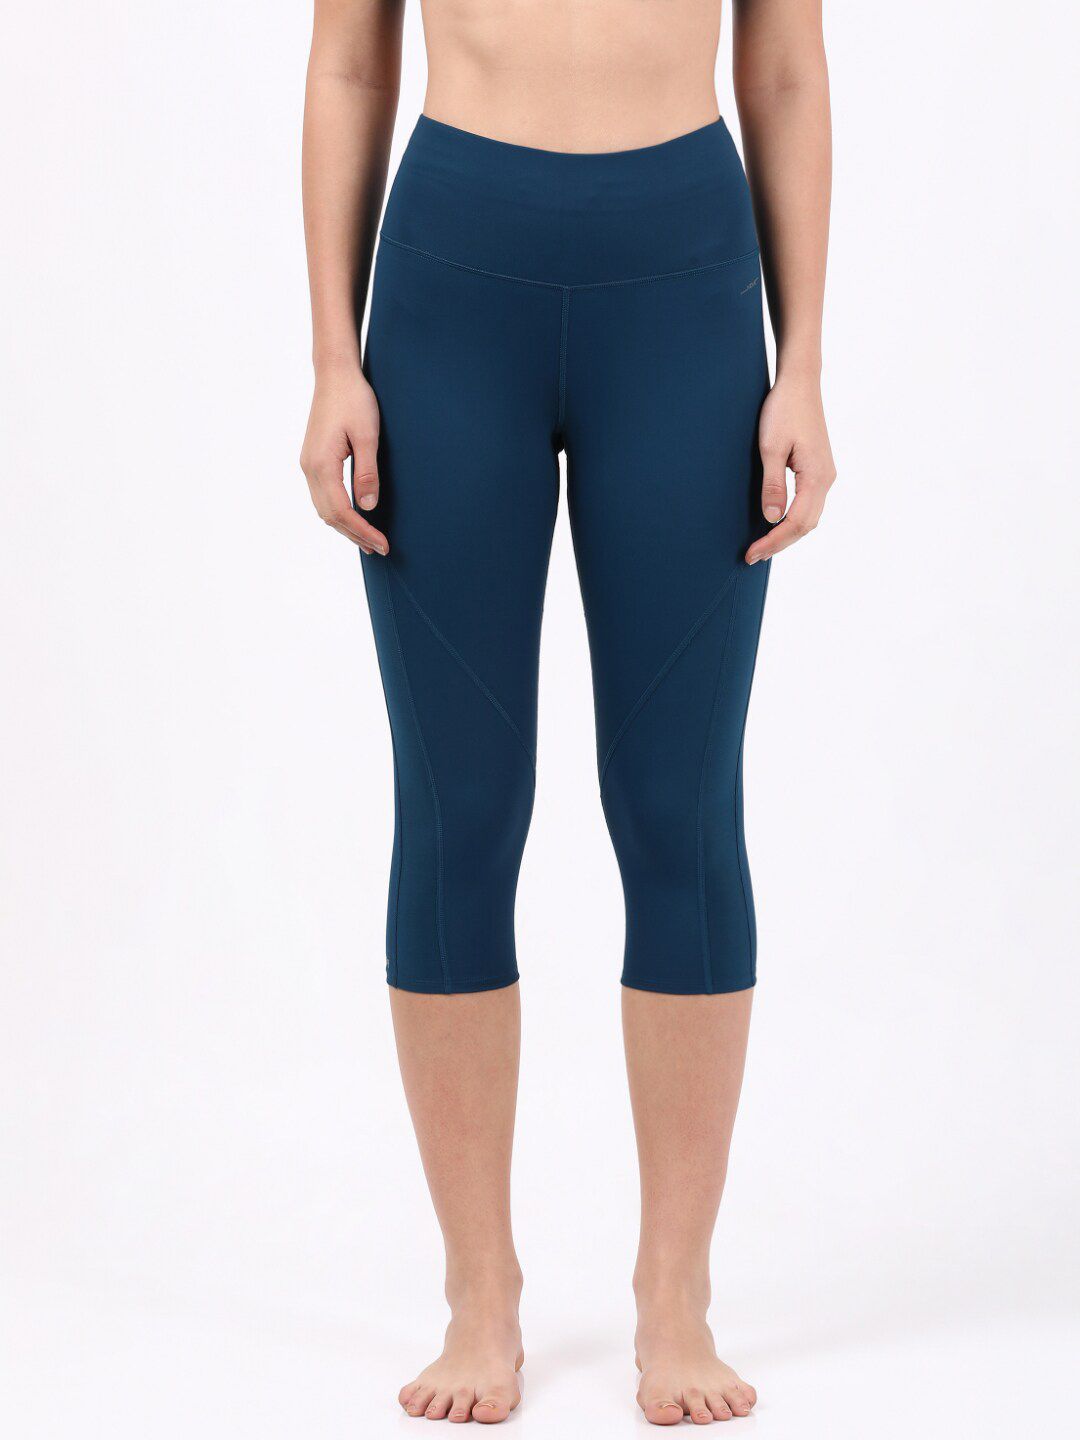 Jockey Women Blue Solid Tights Price in India